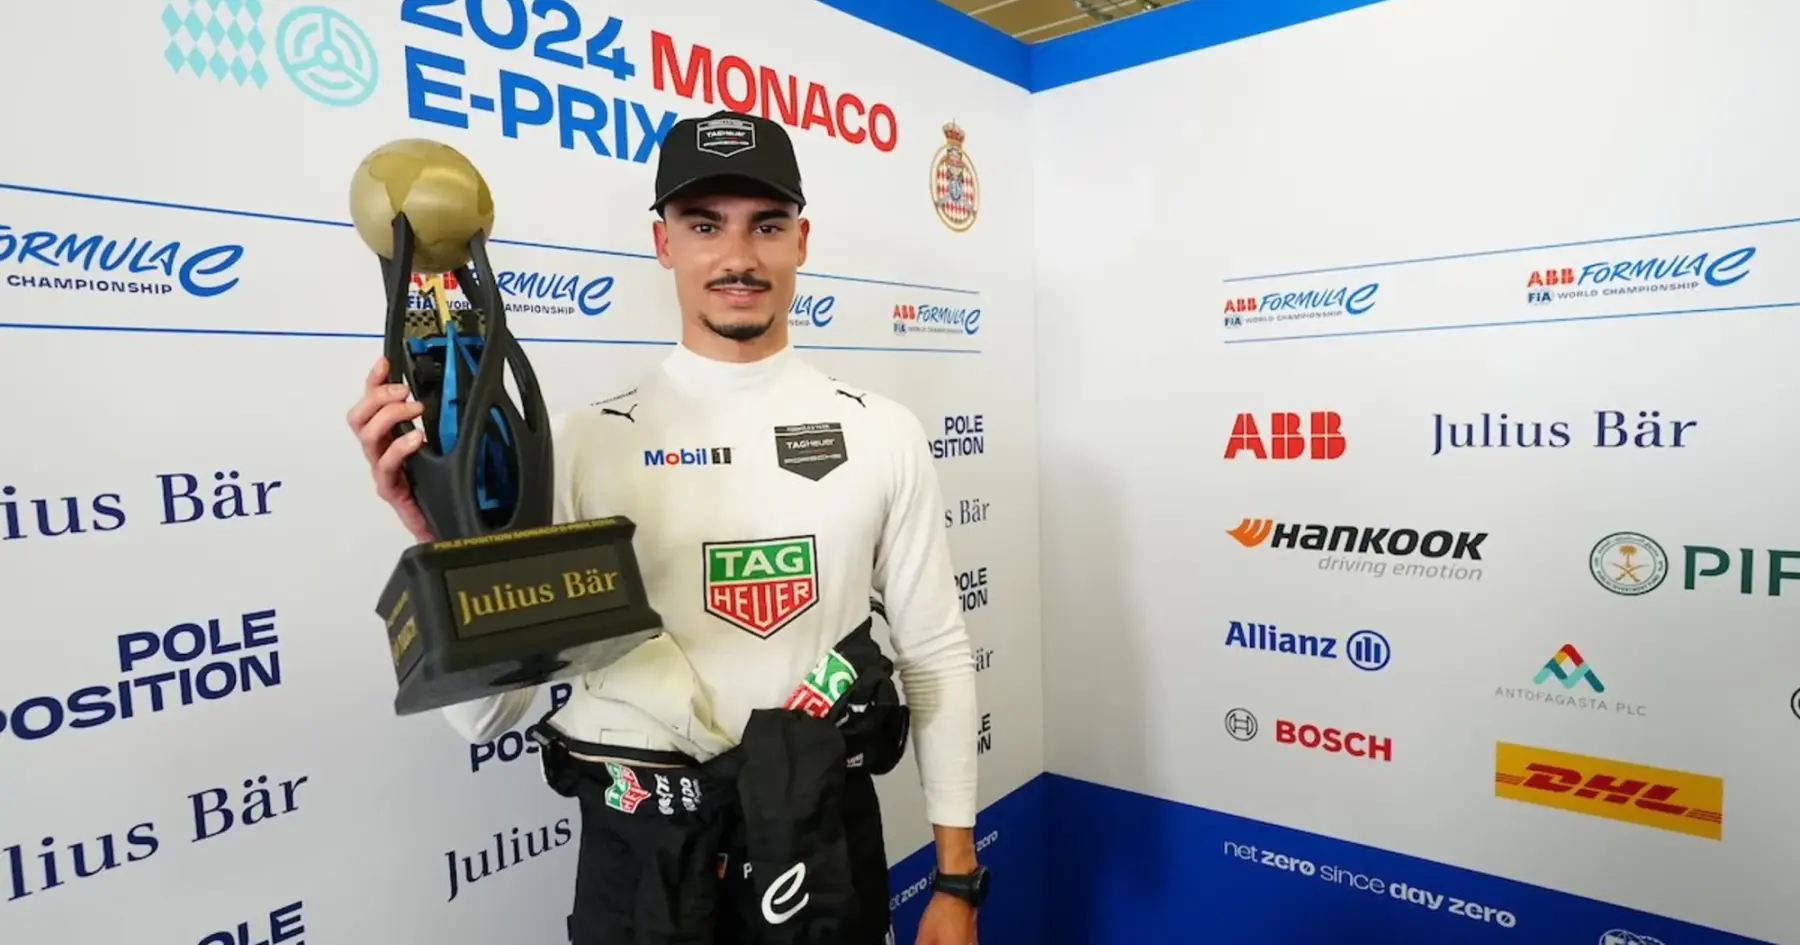 Wehrlein Shines Bright: Secures Monaco Pole and Championship Lead!